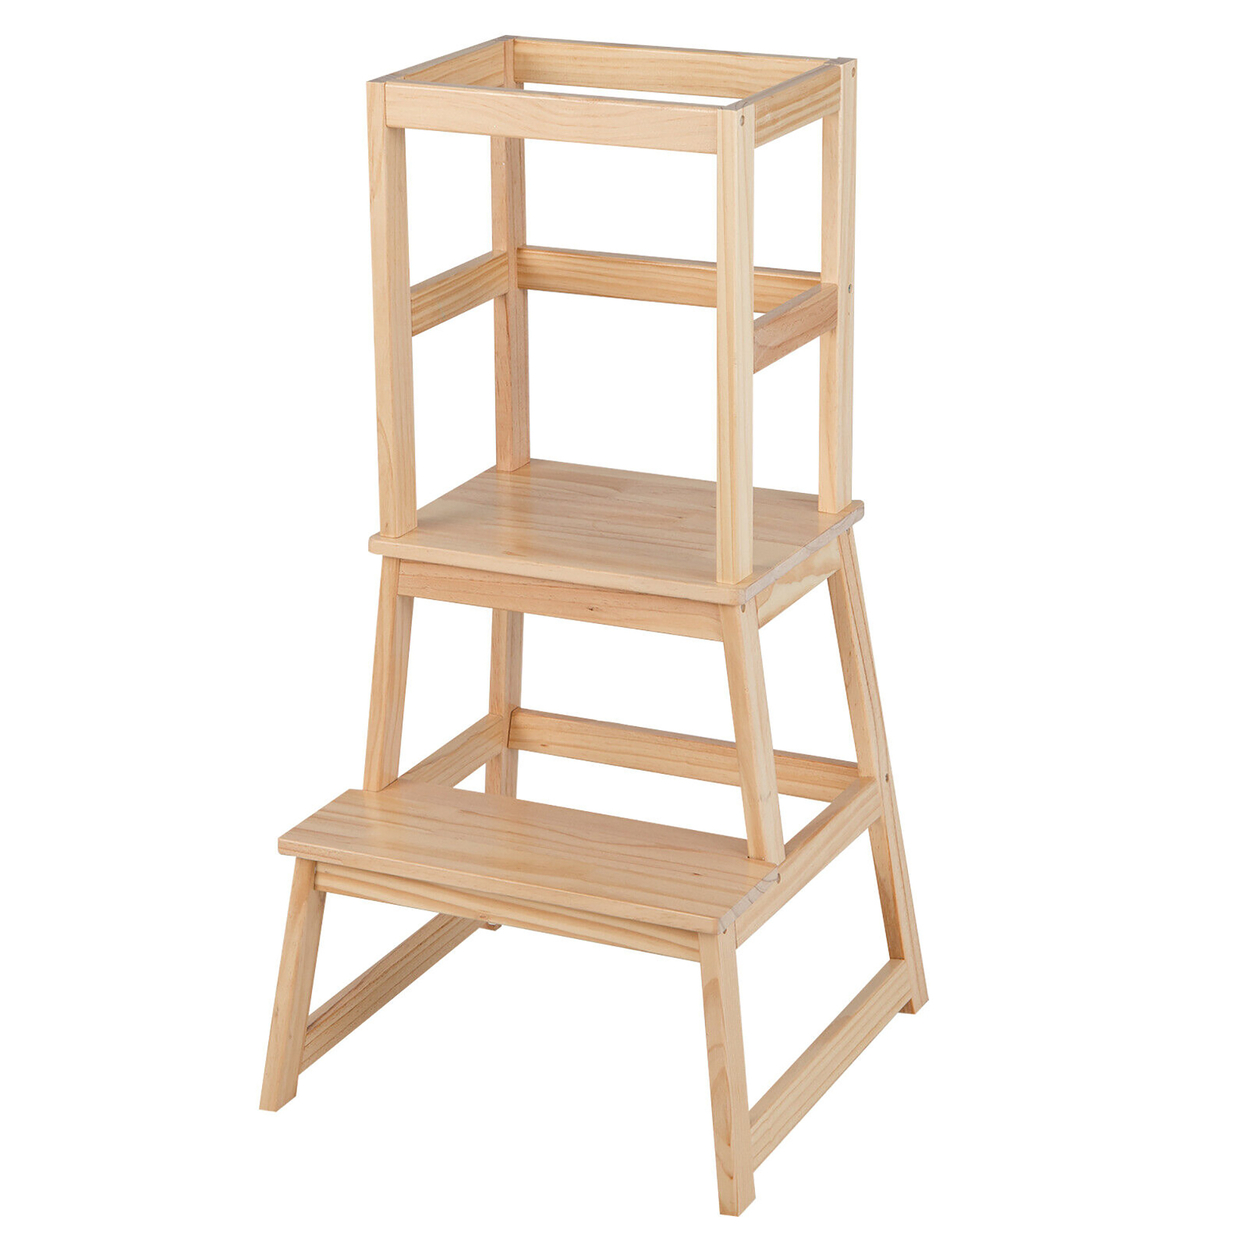 Kids Kitchen Step Stool Kids Standing Tower With Safety Rails - Natural